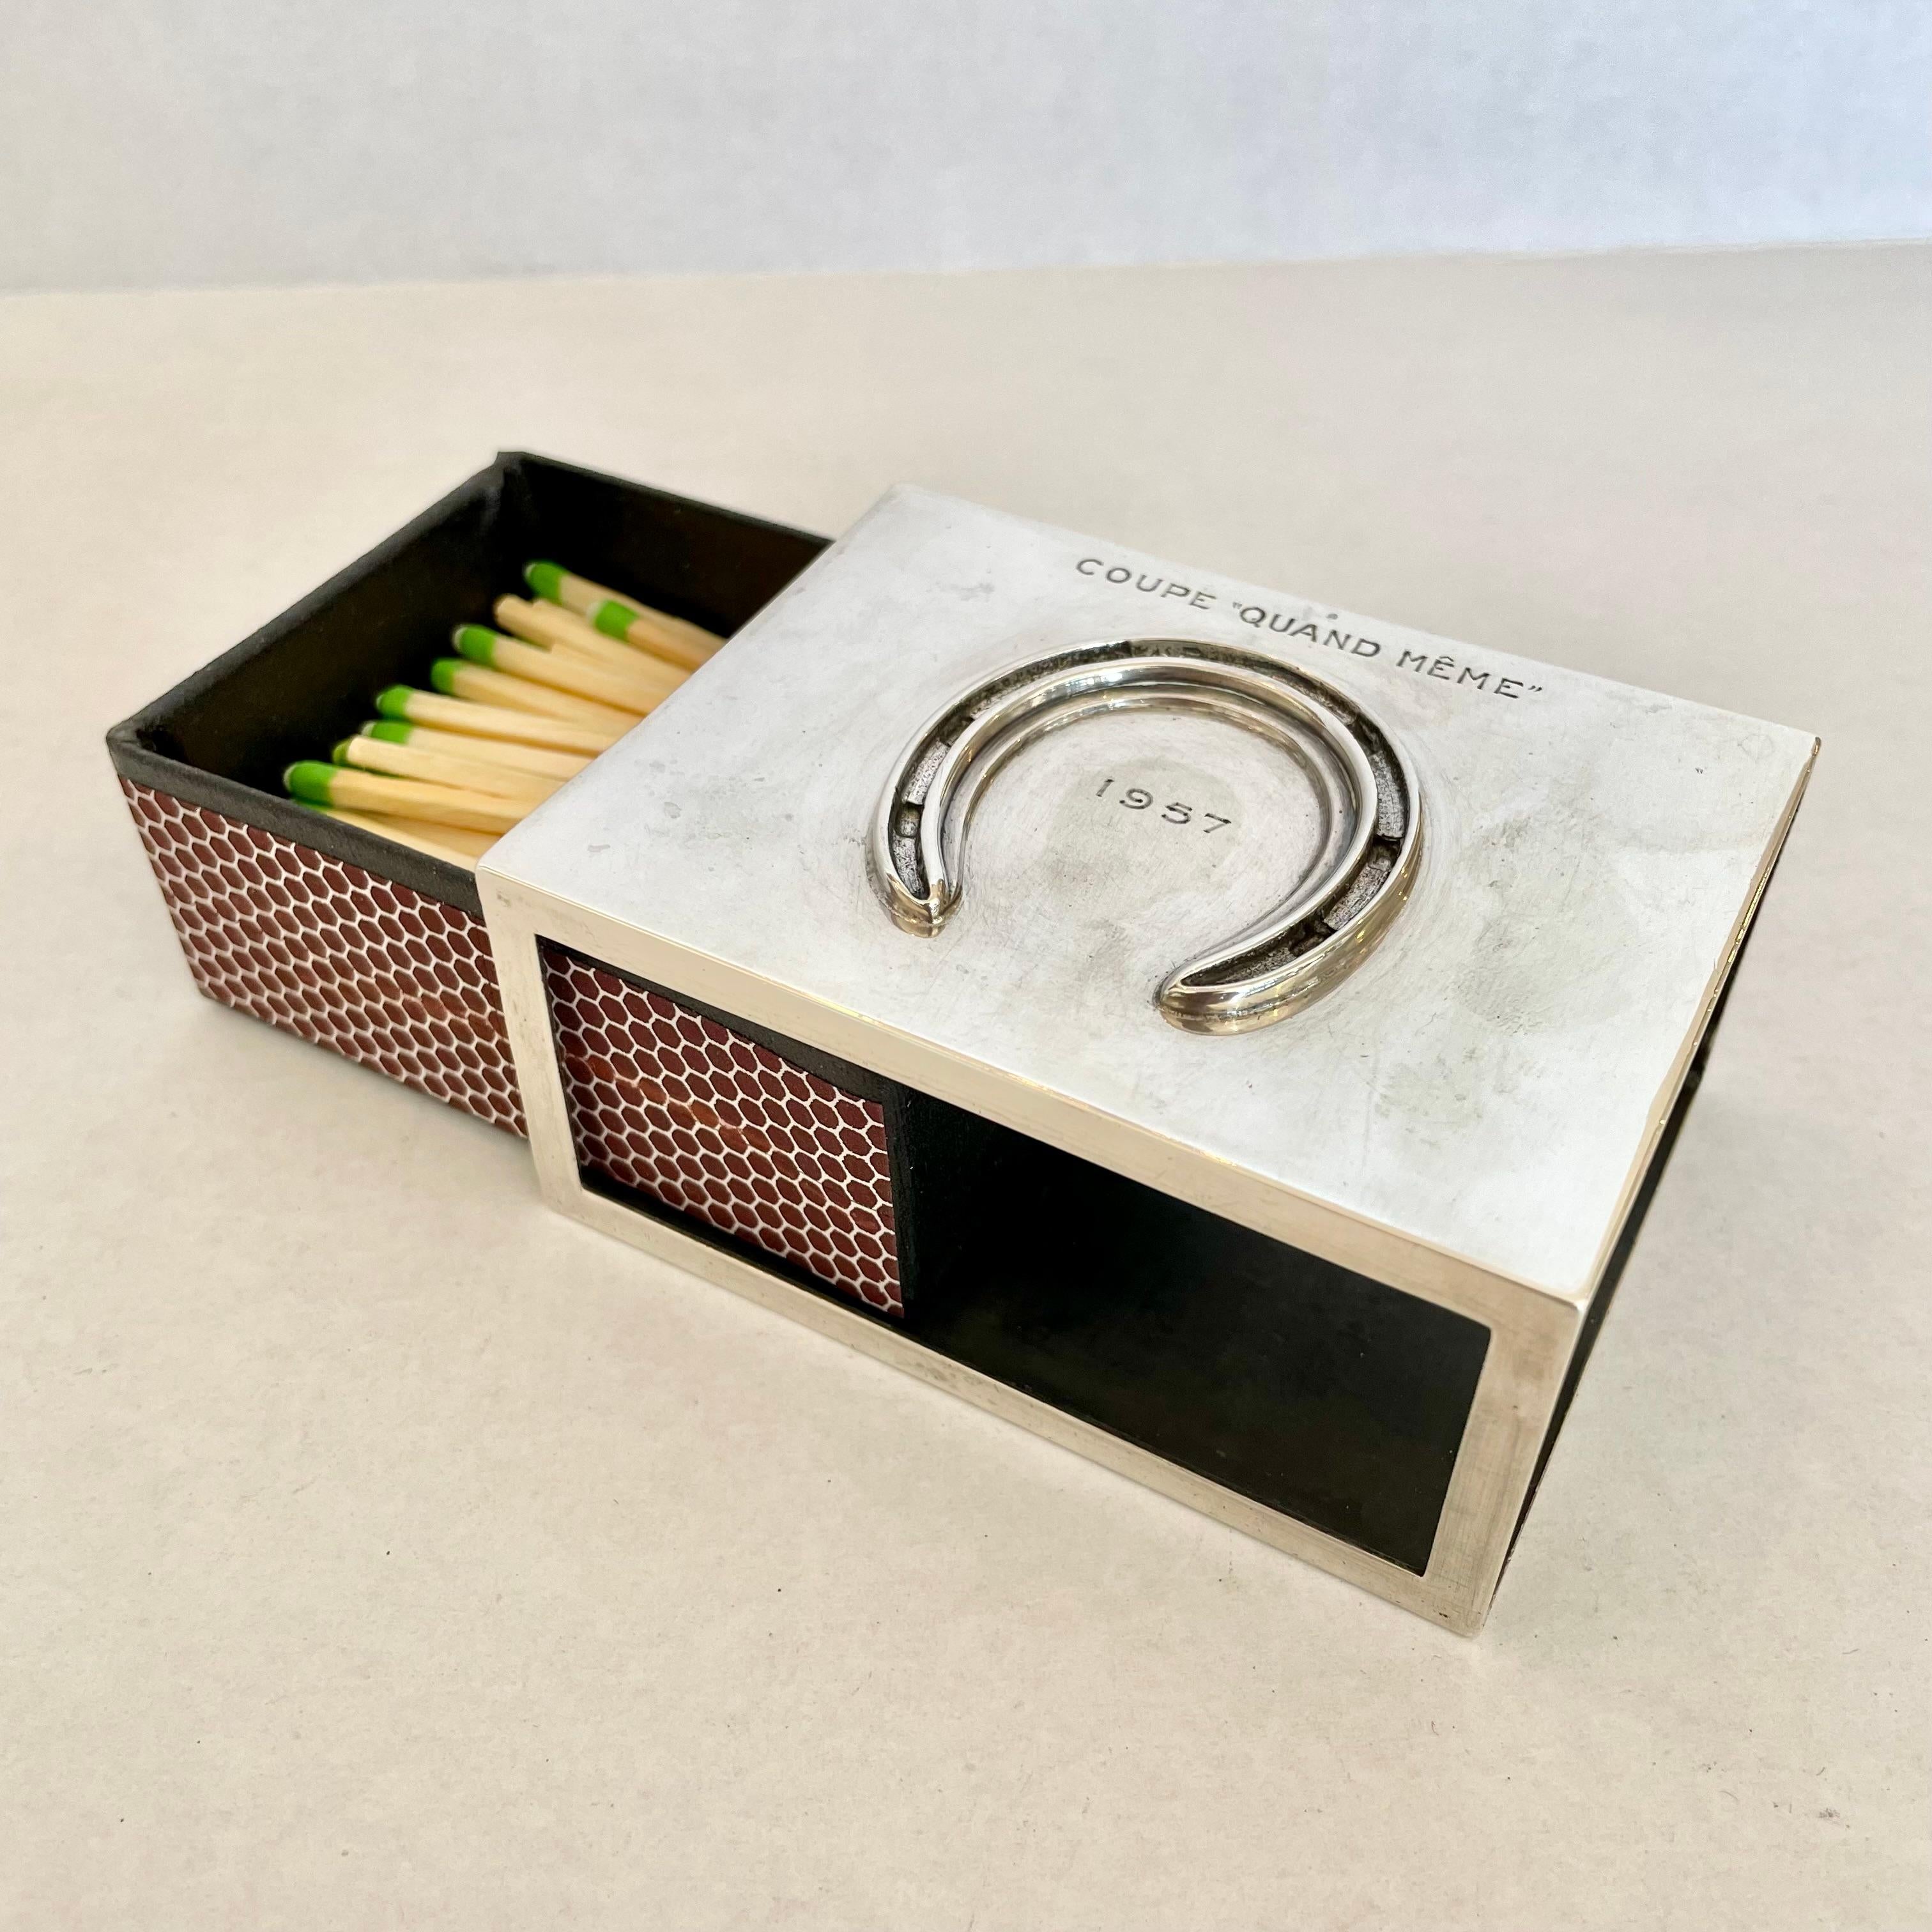 Classic vintage Hermès matchbox. Matchbox has a metal sleeve with a horseshoe insignia. Inset leather box that fits into the metal sleeve. Engraved Hermes Paris on bottom of matchbox. Beautiful accent piece to elevate any nightstand, desk or side